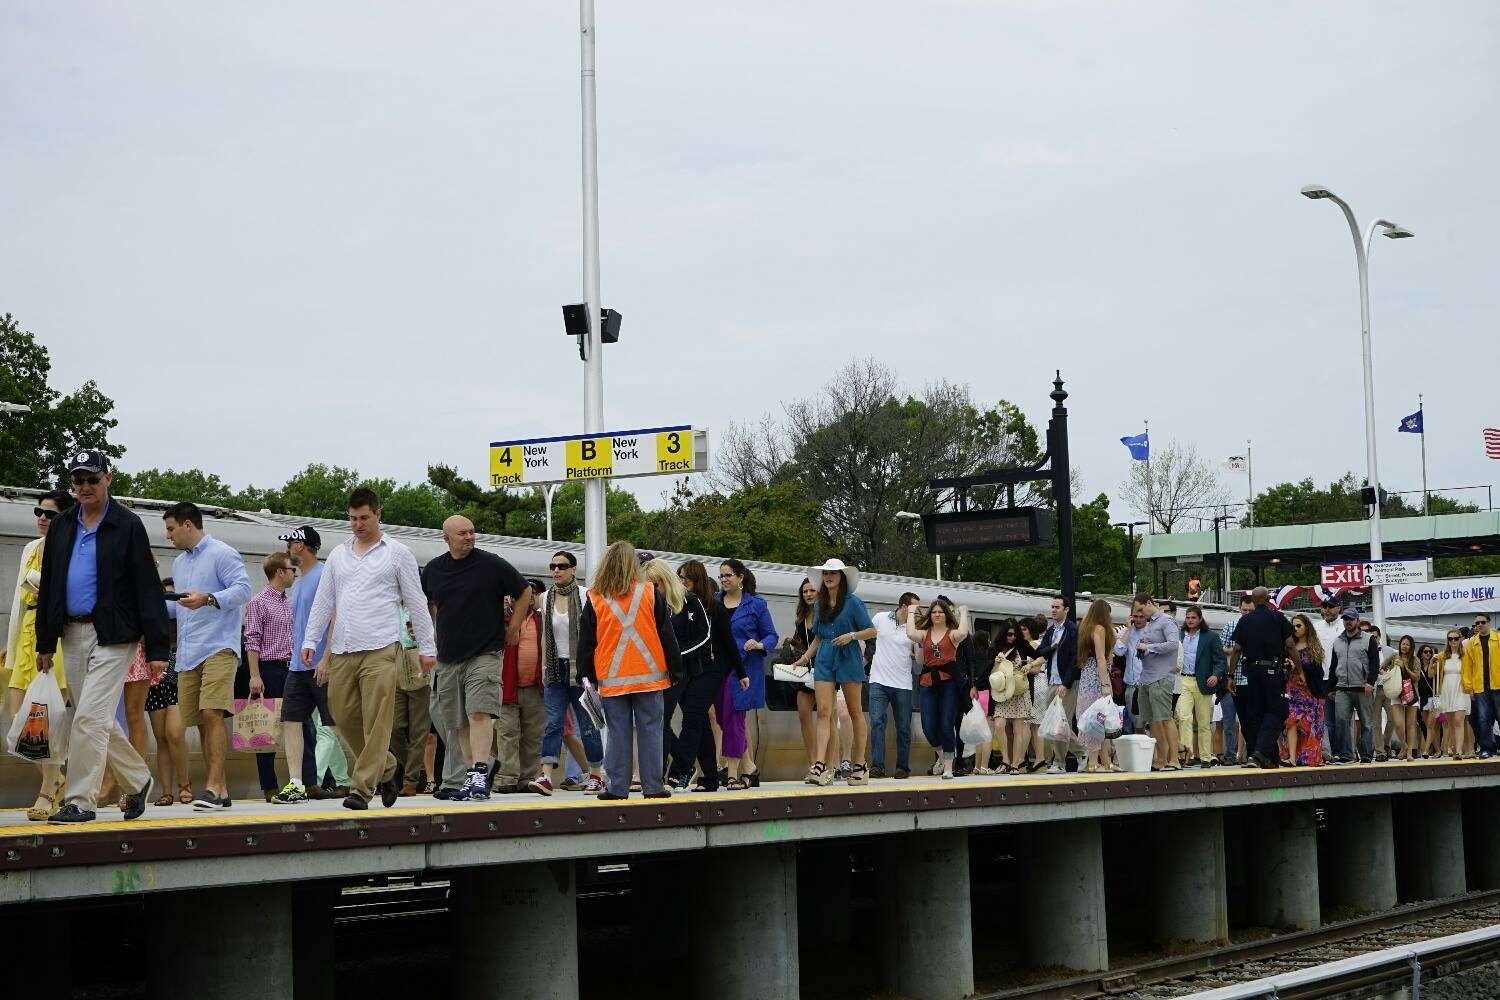 A crowd of people on a train platform.